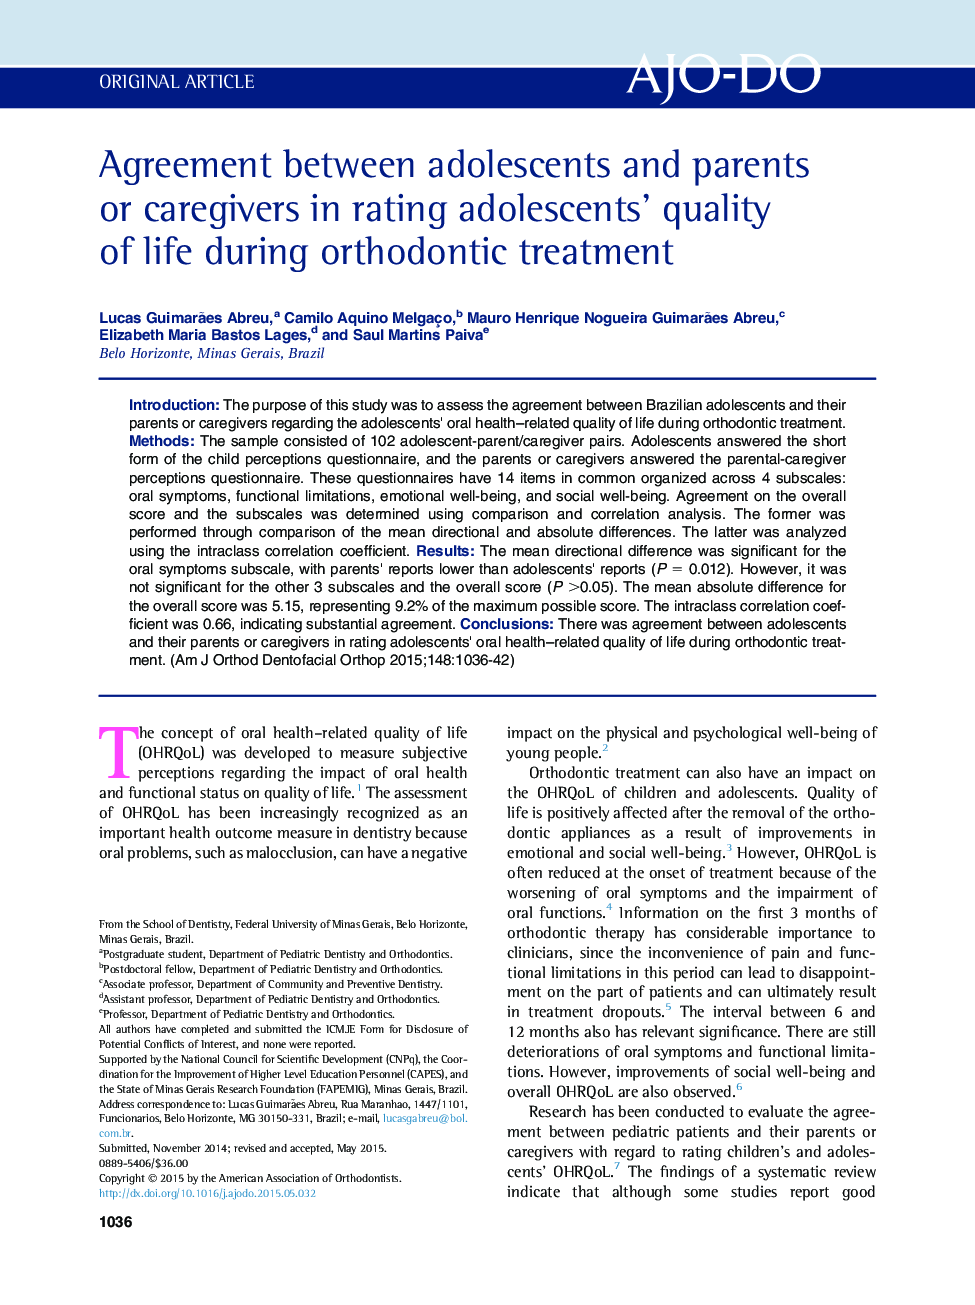 Agreement between adolescents and parents or caregivers in rating adolescents' quality of life during orthodontic treatment 